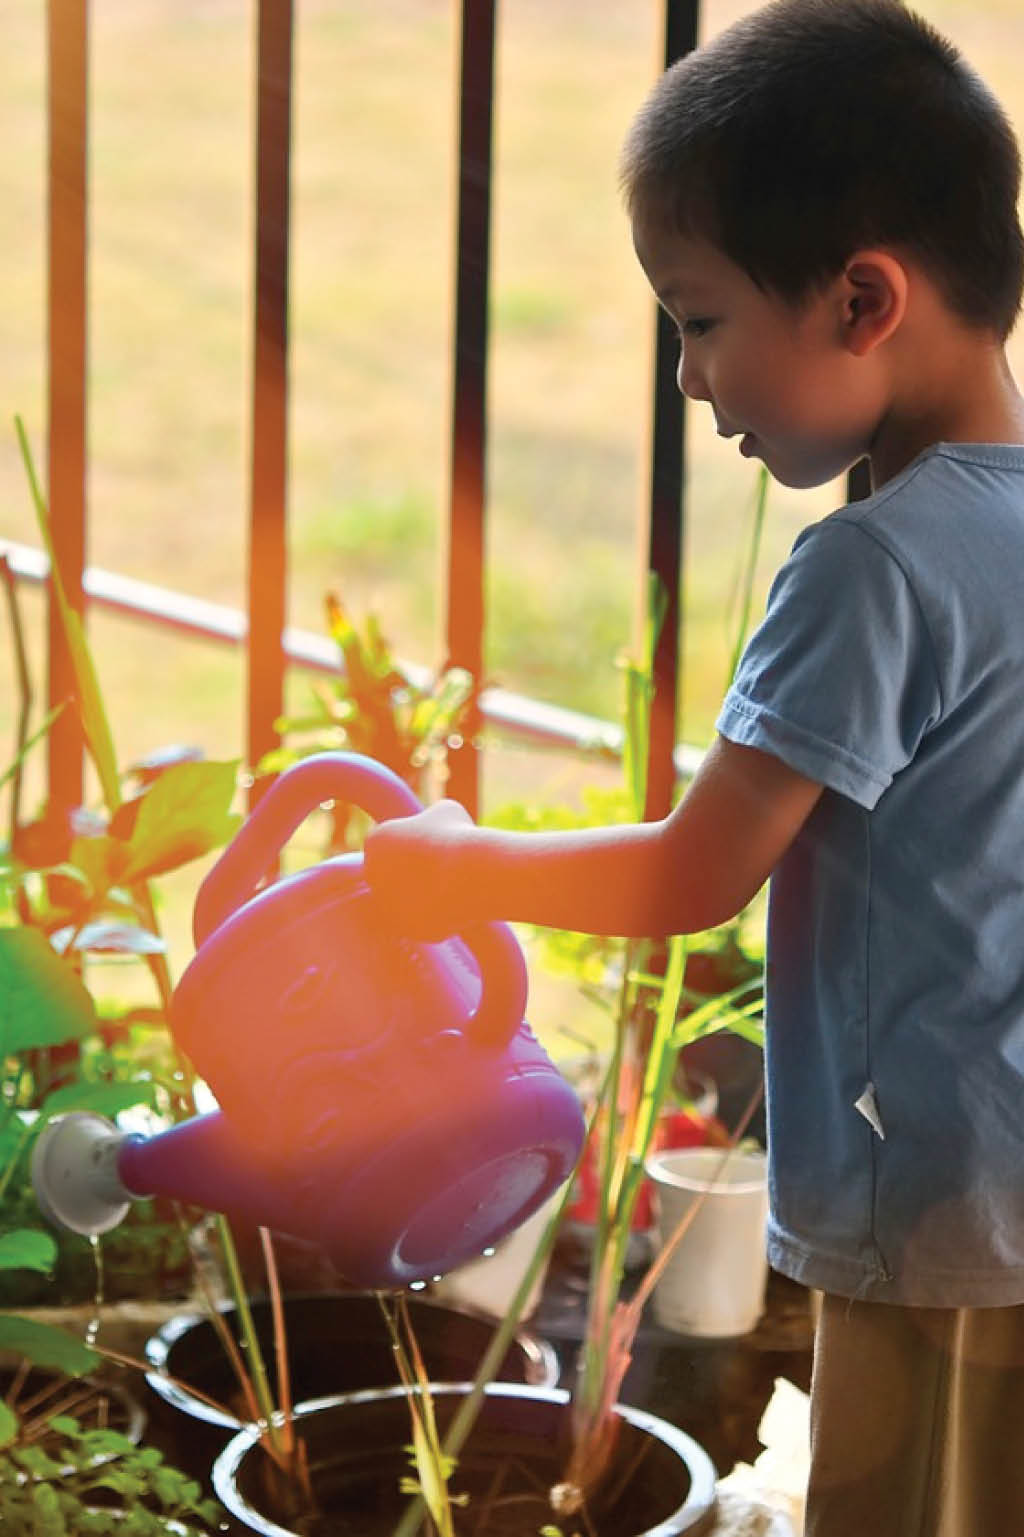 Young boy watering plants with watering can